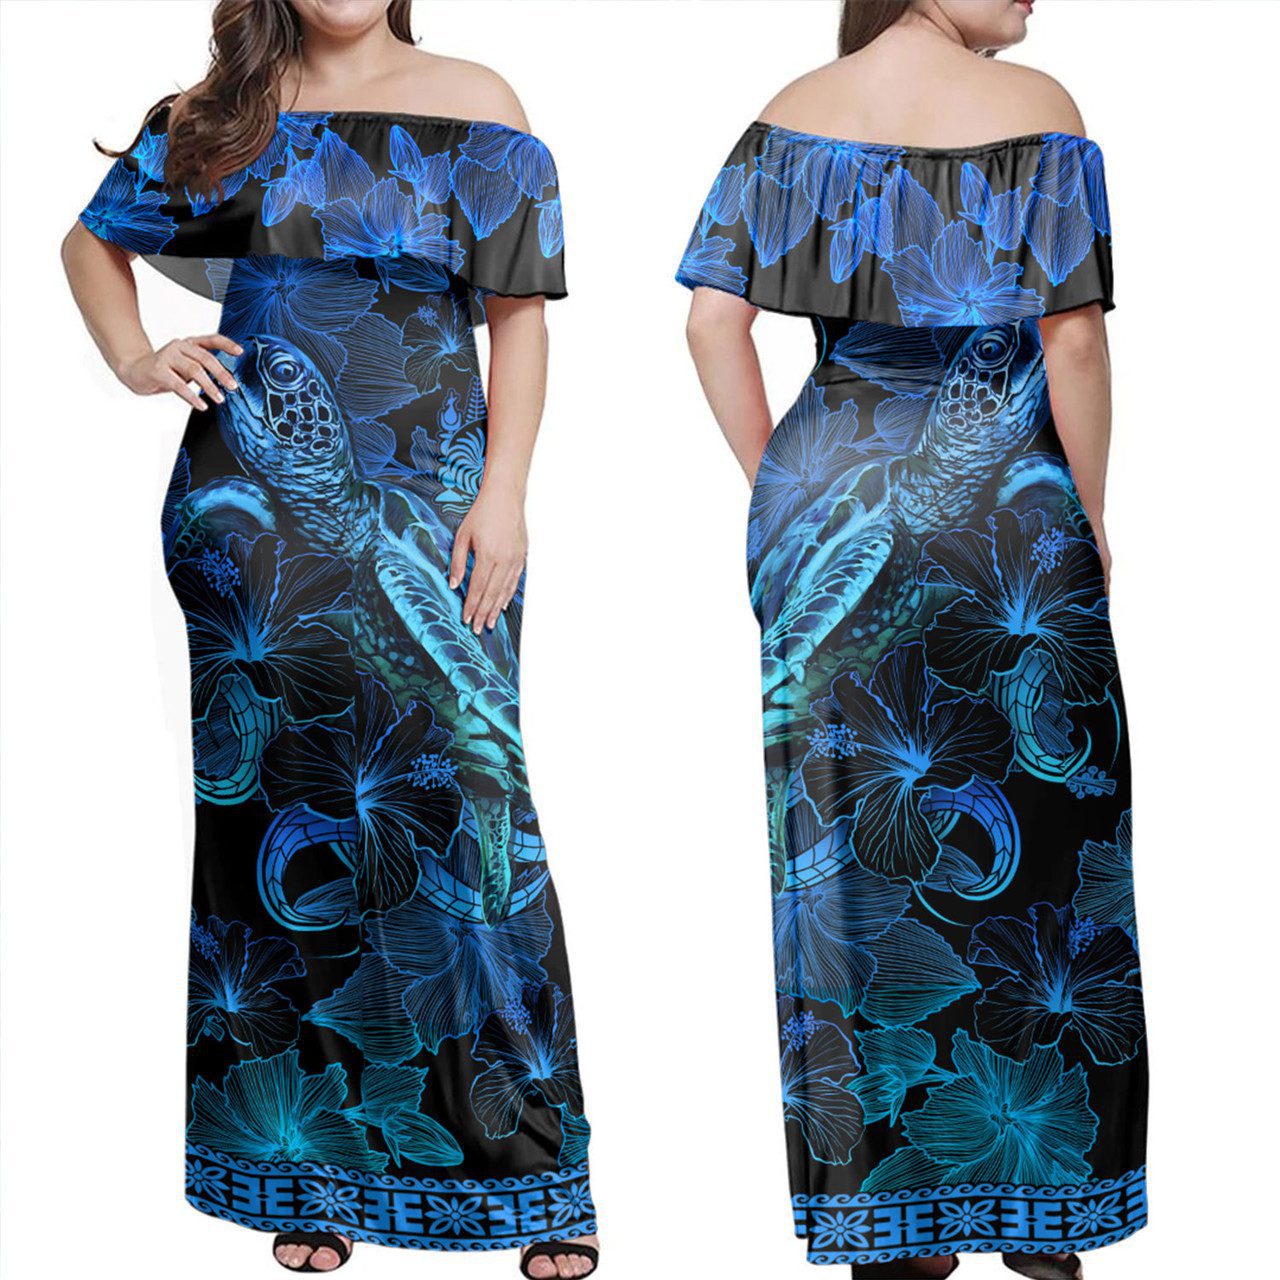 New Caledonia Off Shoulder Long Dress Sea Turtle With Blooming Hibiscus Flowers Tribal Blue